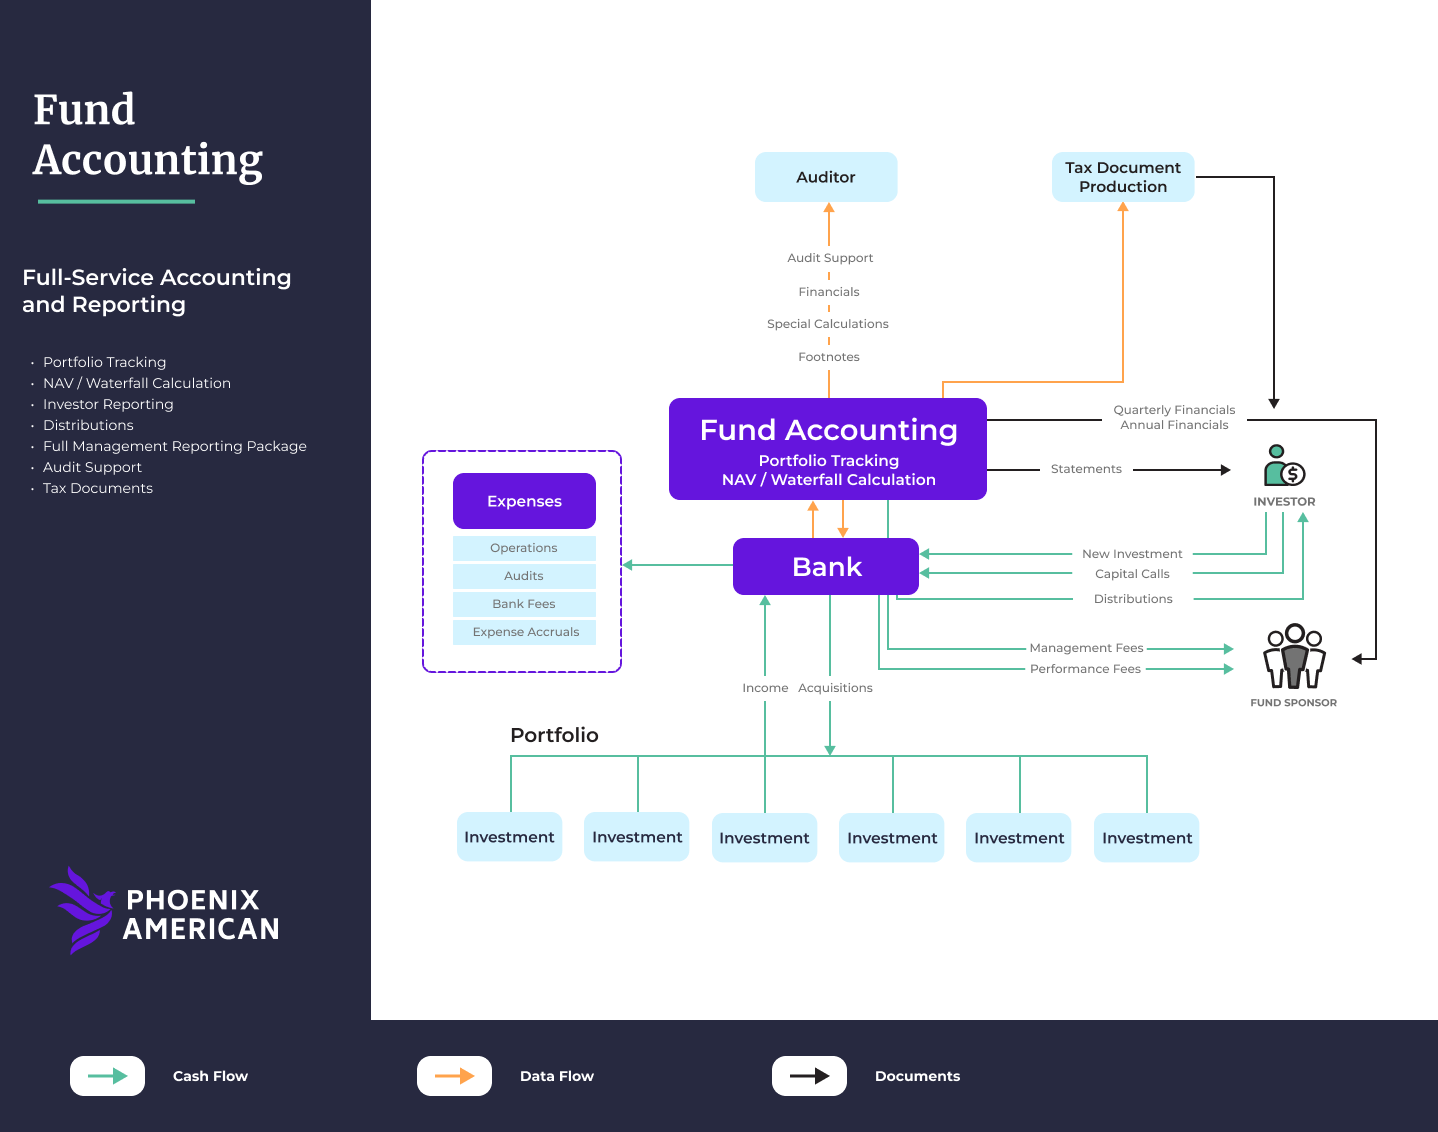 What is Fund Accounting infographic?